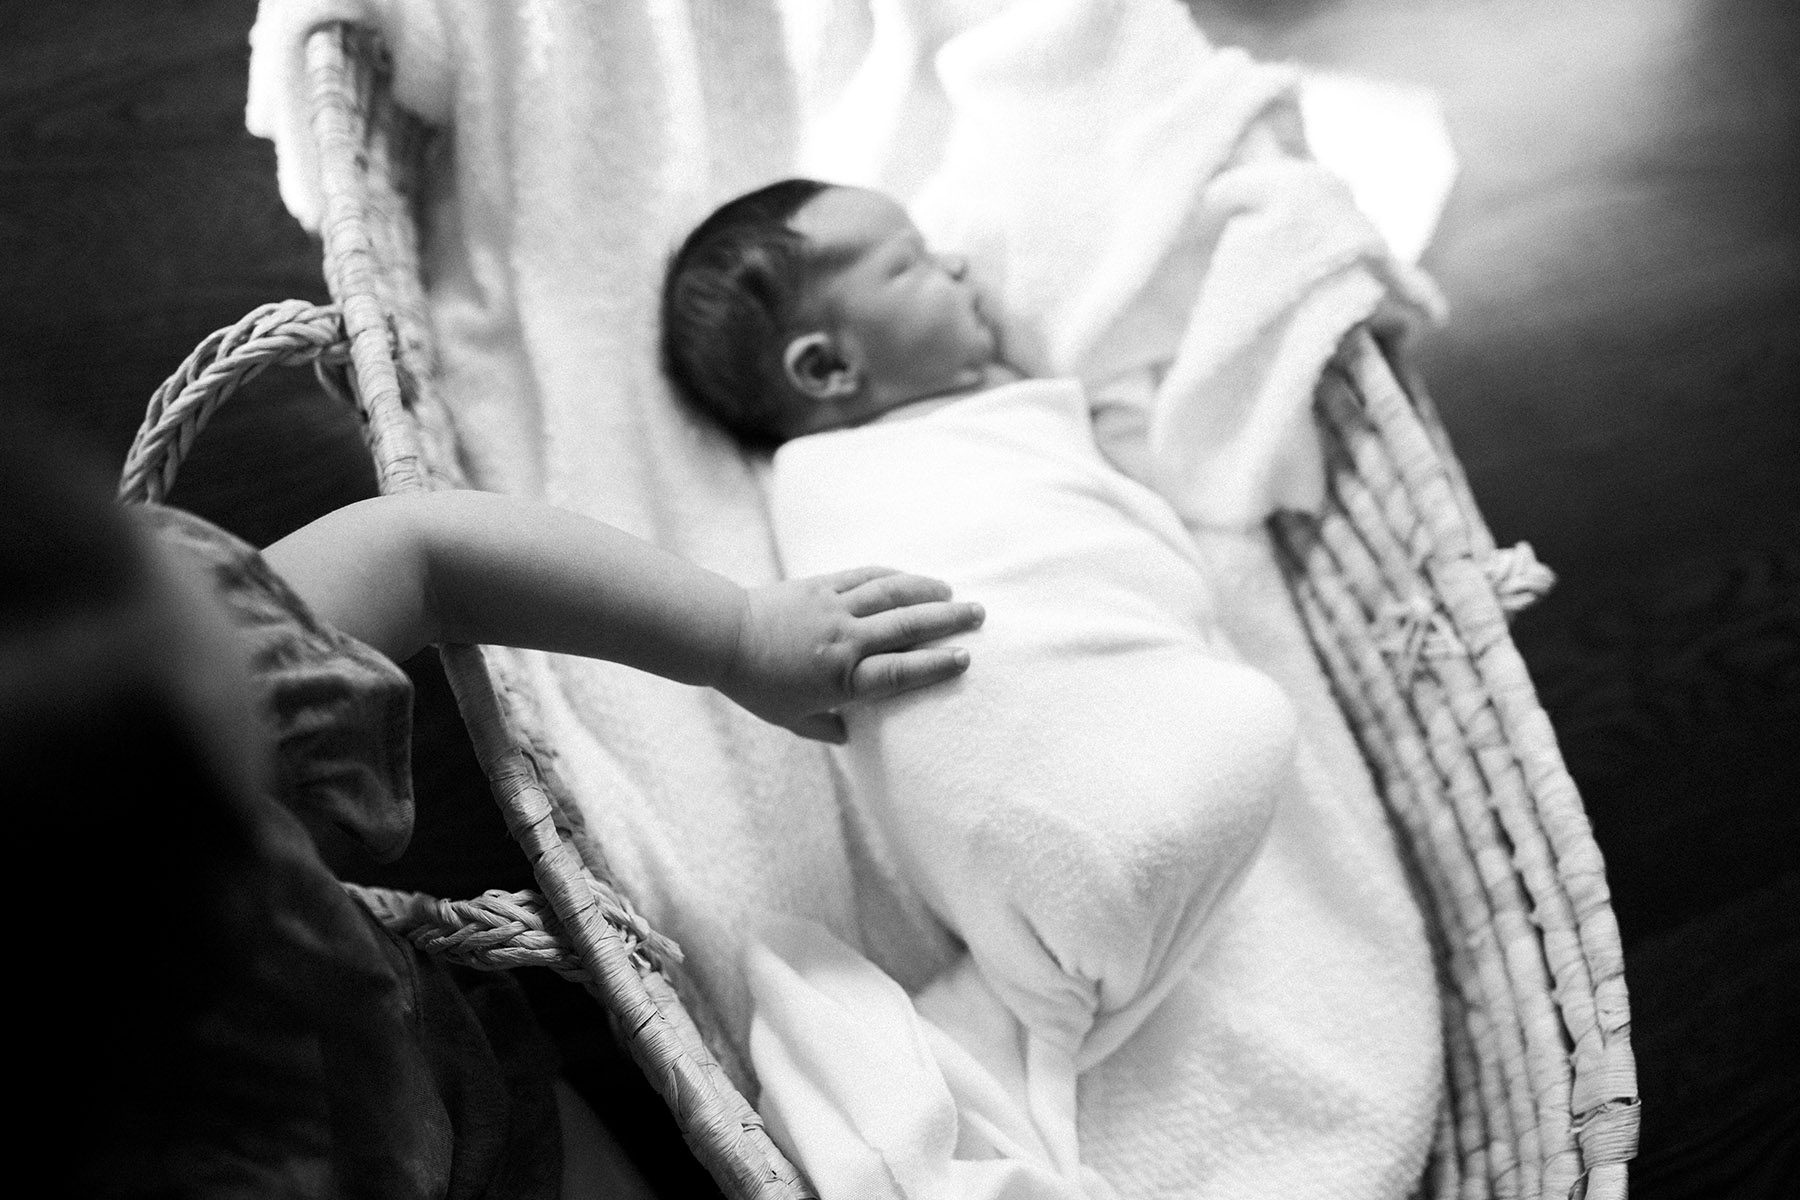 Downers Grove newborn photographer captured this image of a newborn baby laying in a Moses basket with her big sister reaching in to touch her.